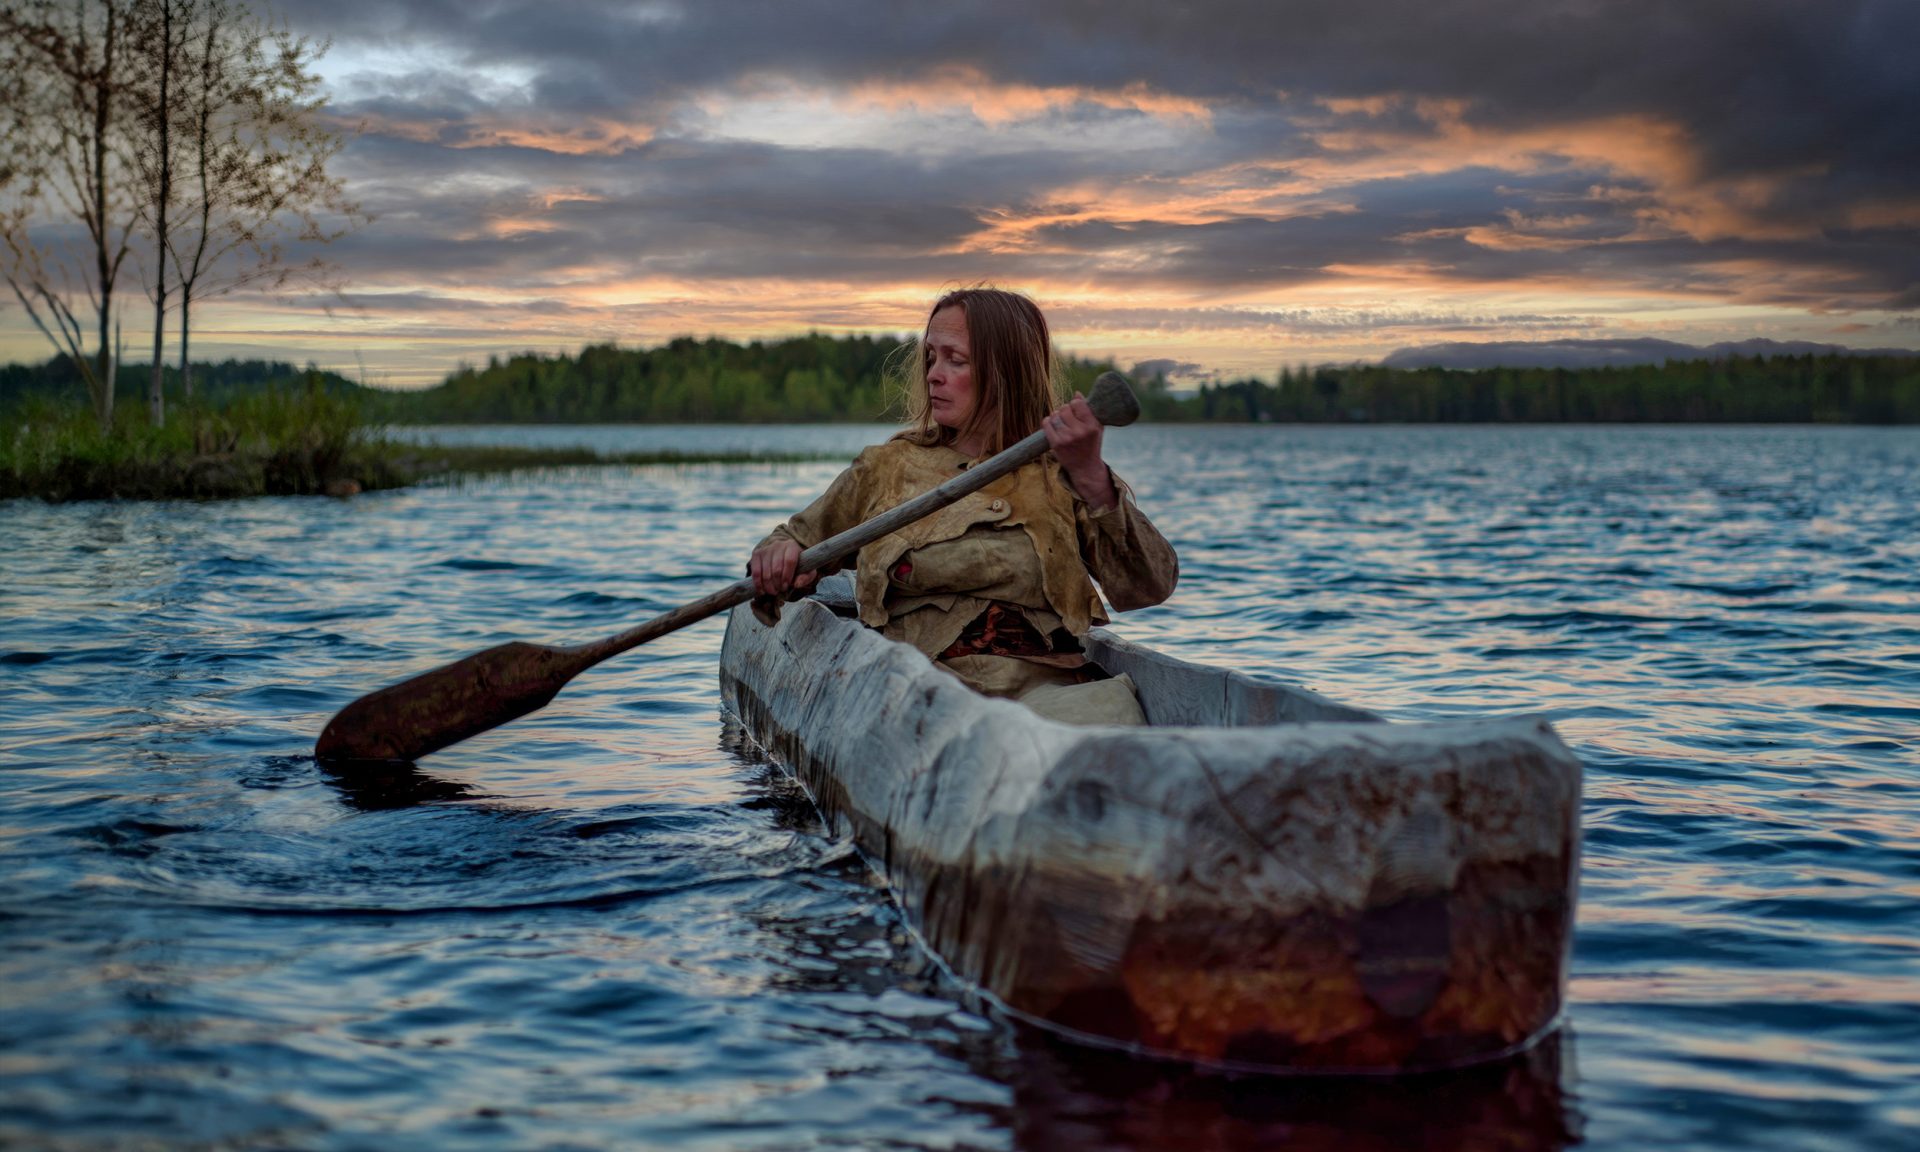 The guide, dressed in Stone Age accessories, paddles on a wooden, hand-carved rowboat. Summer evening, dim lighting.